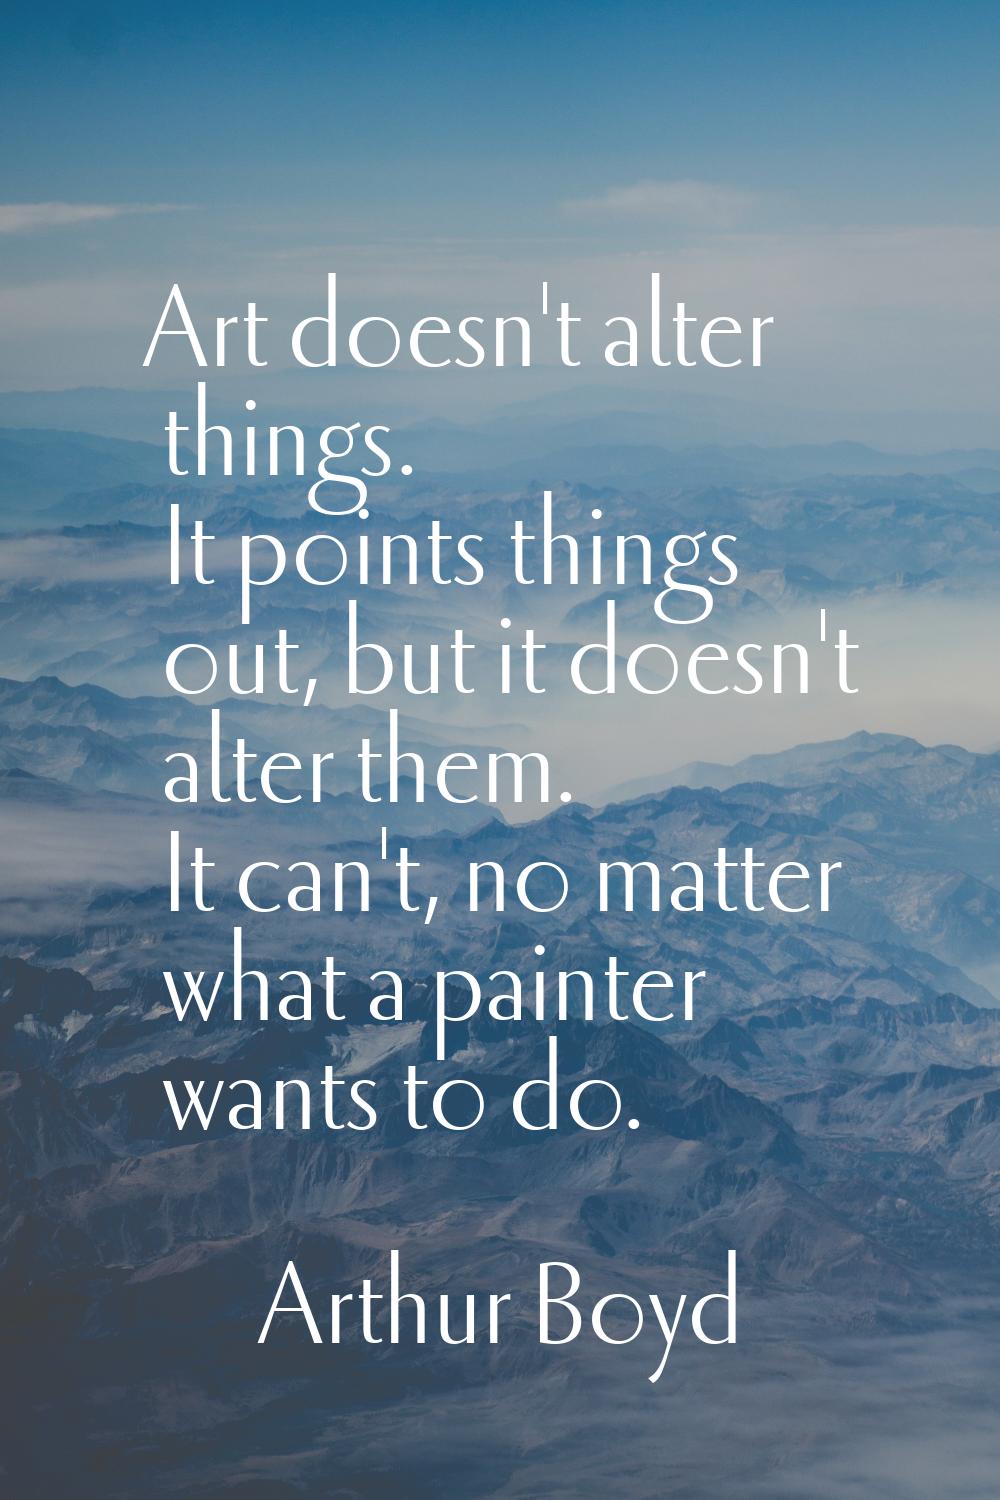 Art doesn't alter things. It points things out, but it doesn't alter them. It can't, no matter what